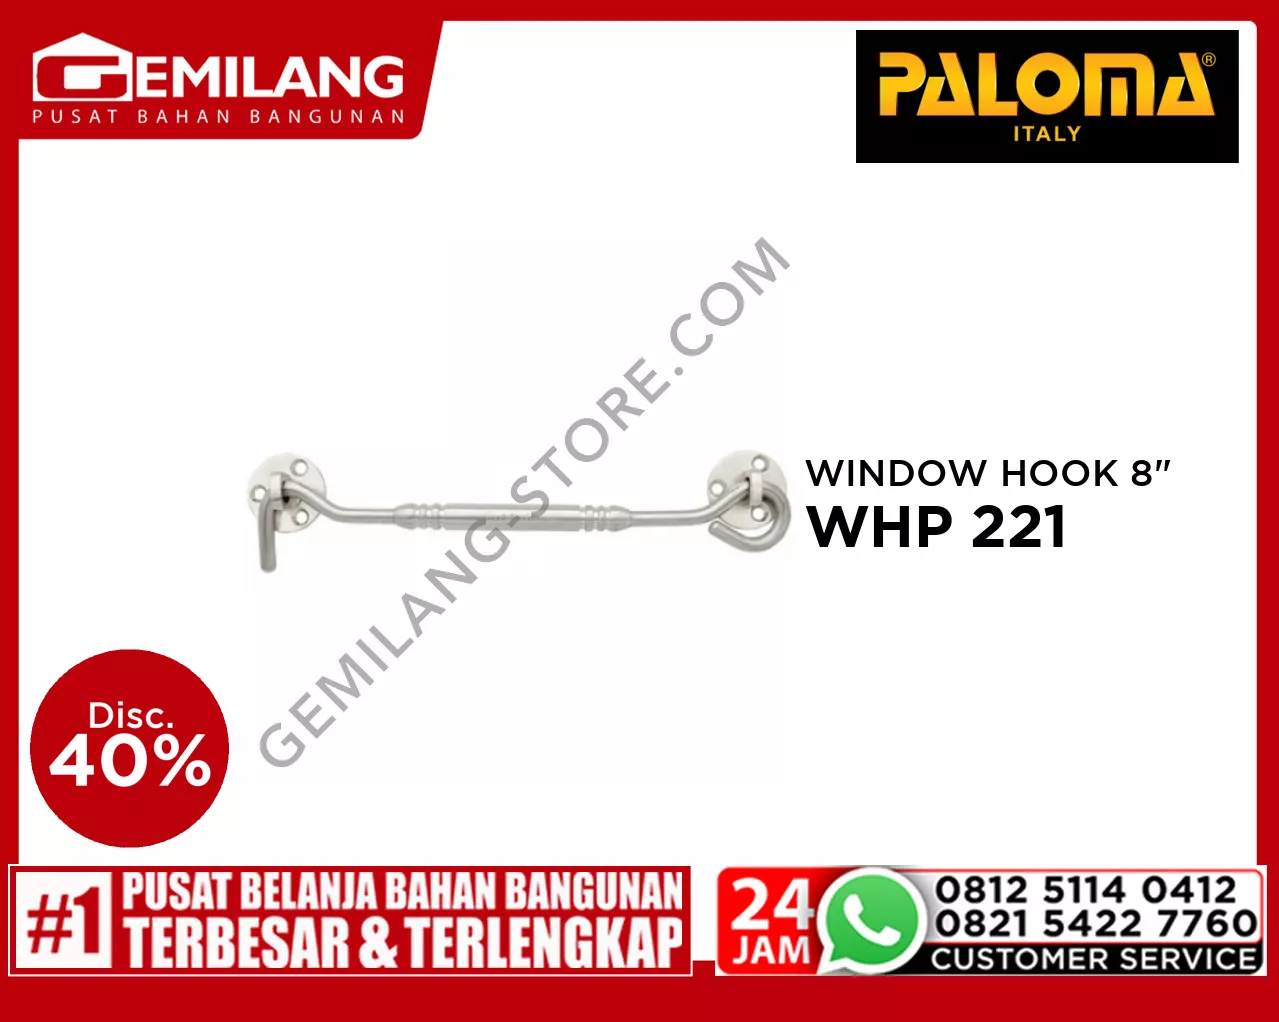 PALOMA WINDOW HOOK STAINLESS STEEL PALOMA 203 8inch BL SSS WHP 221